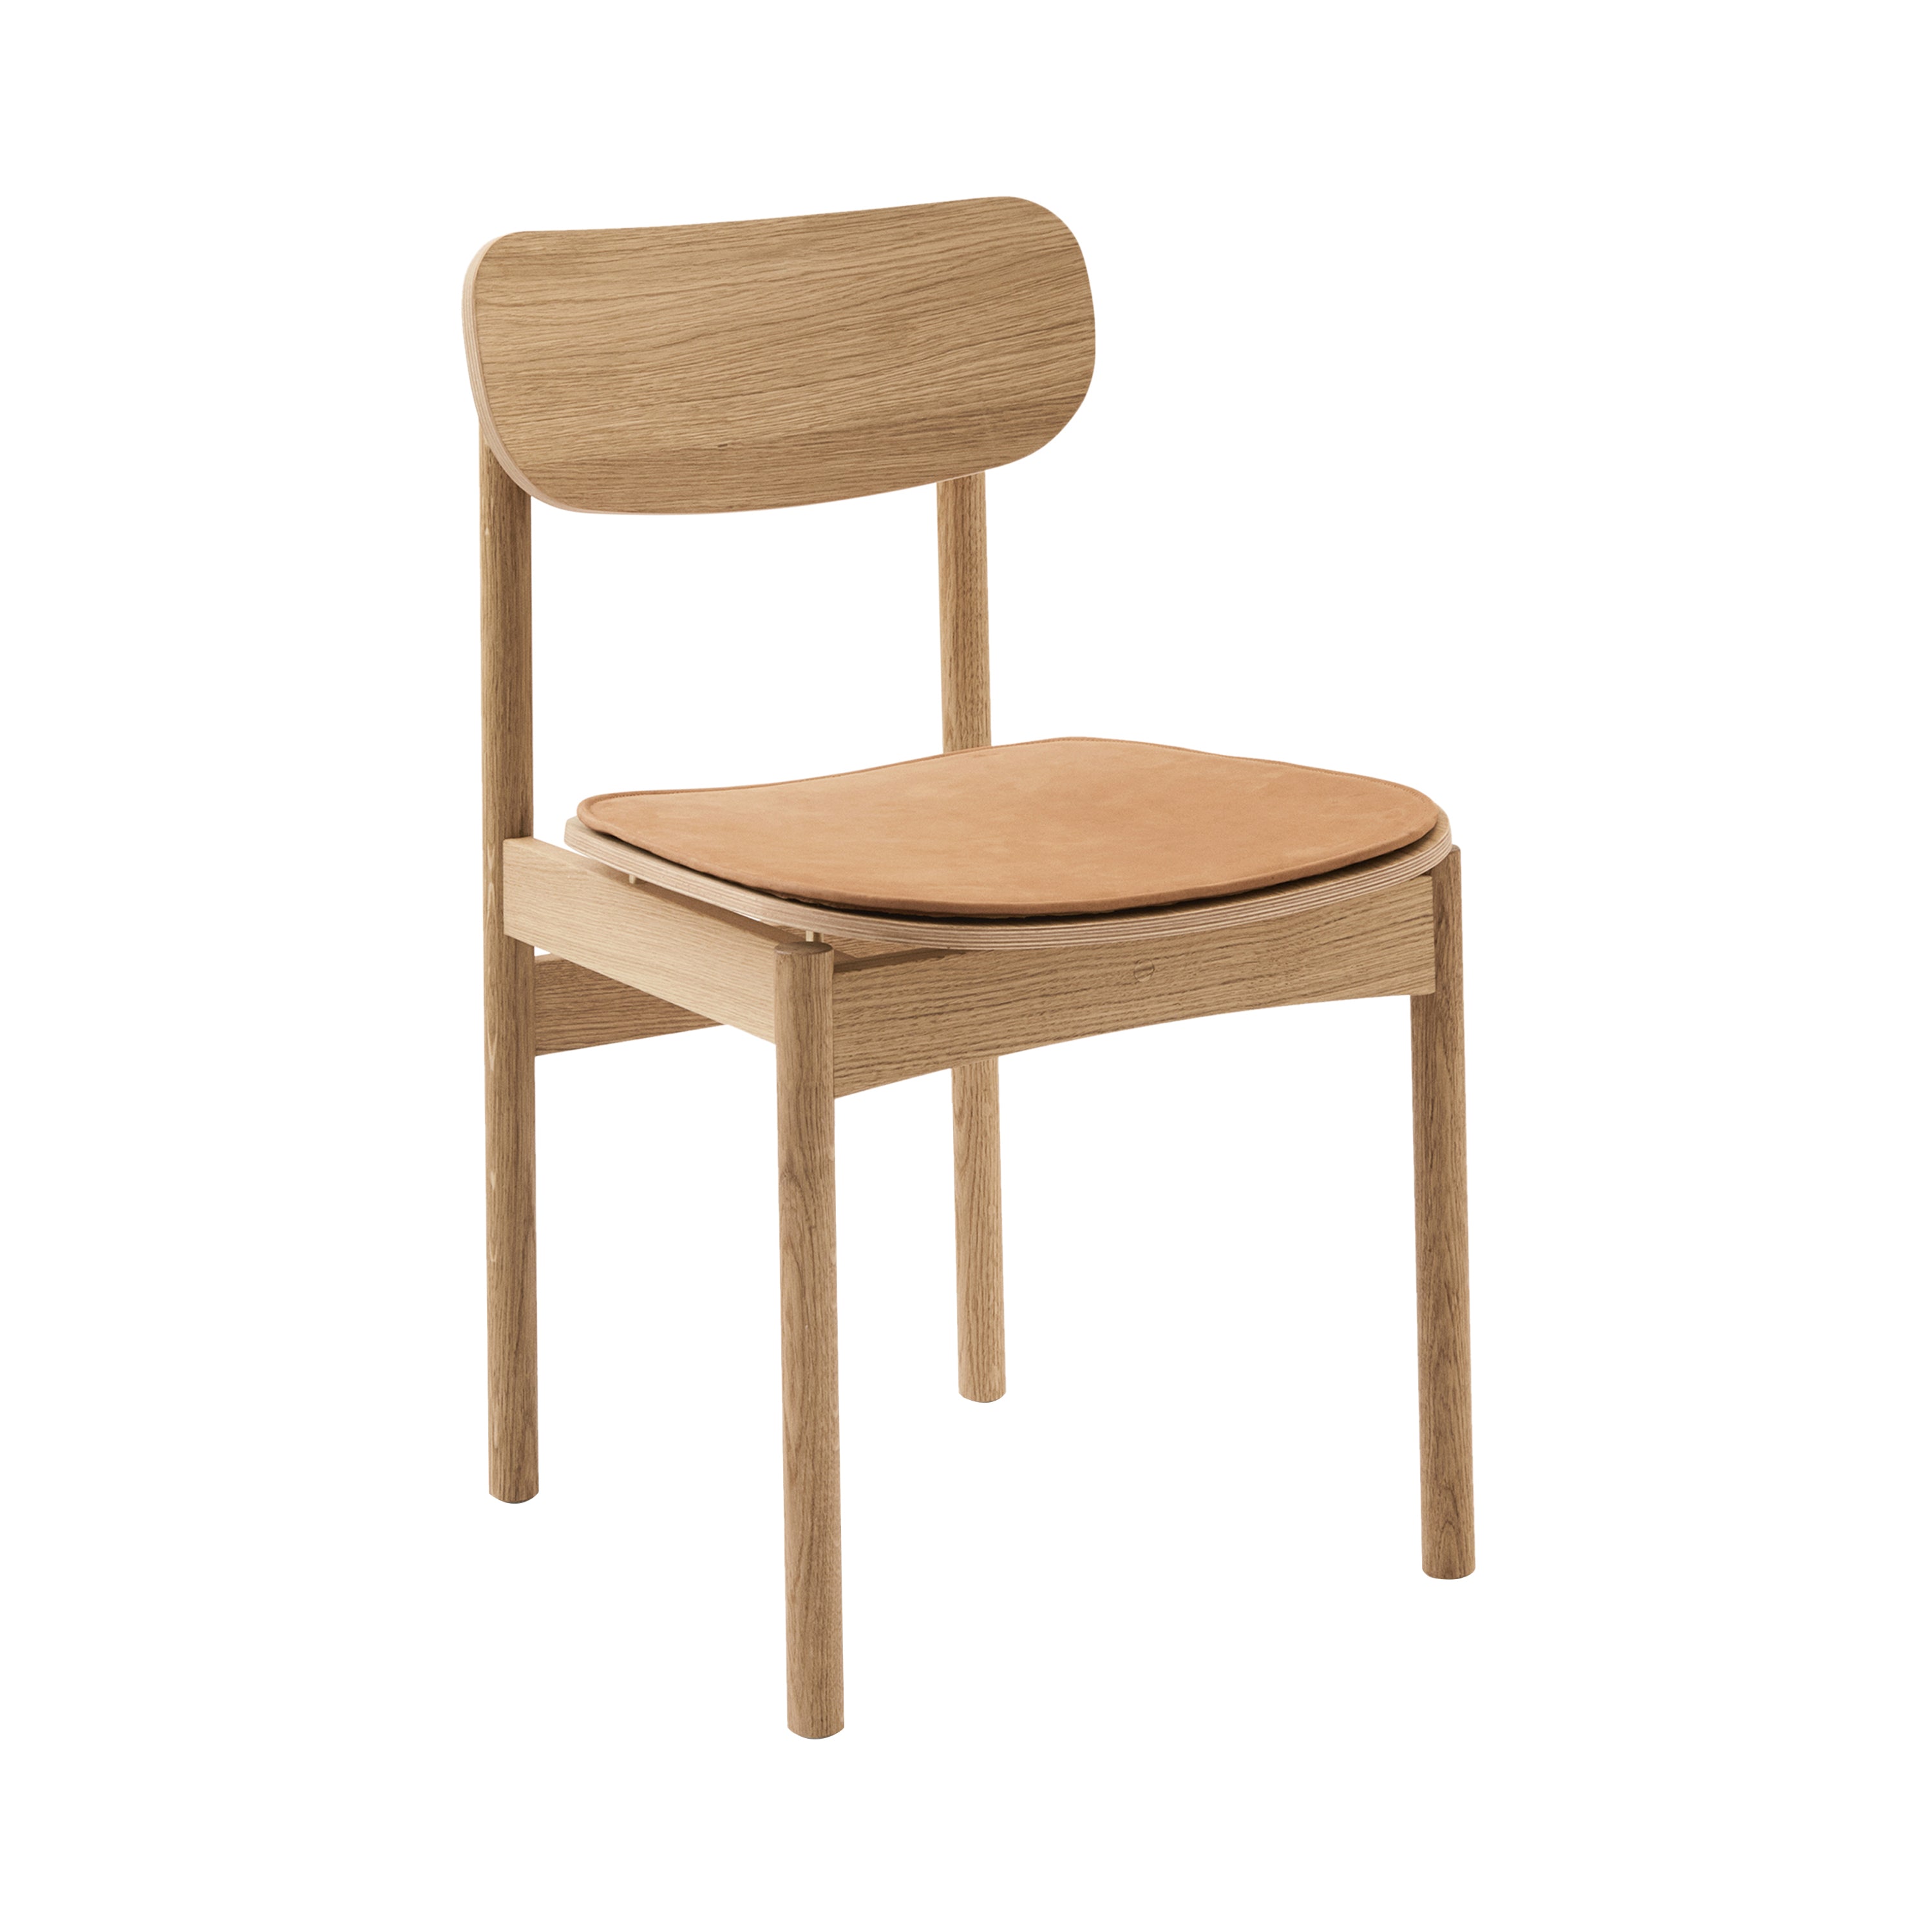 Vester Chair: With Cushion